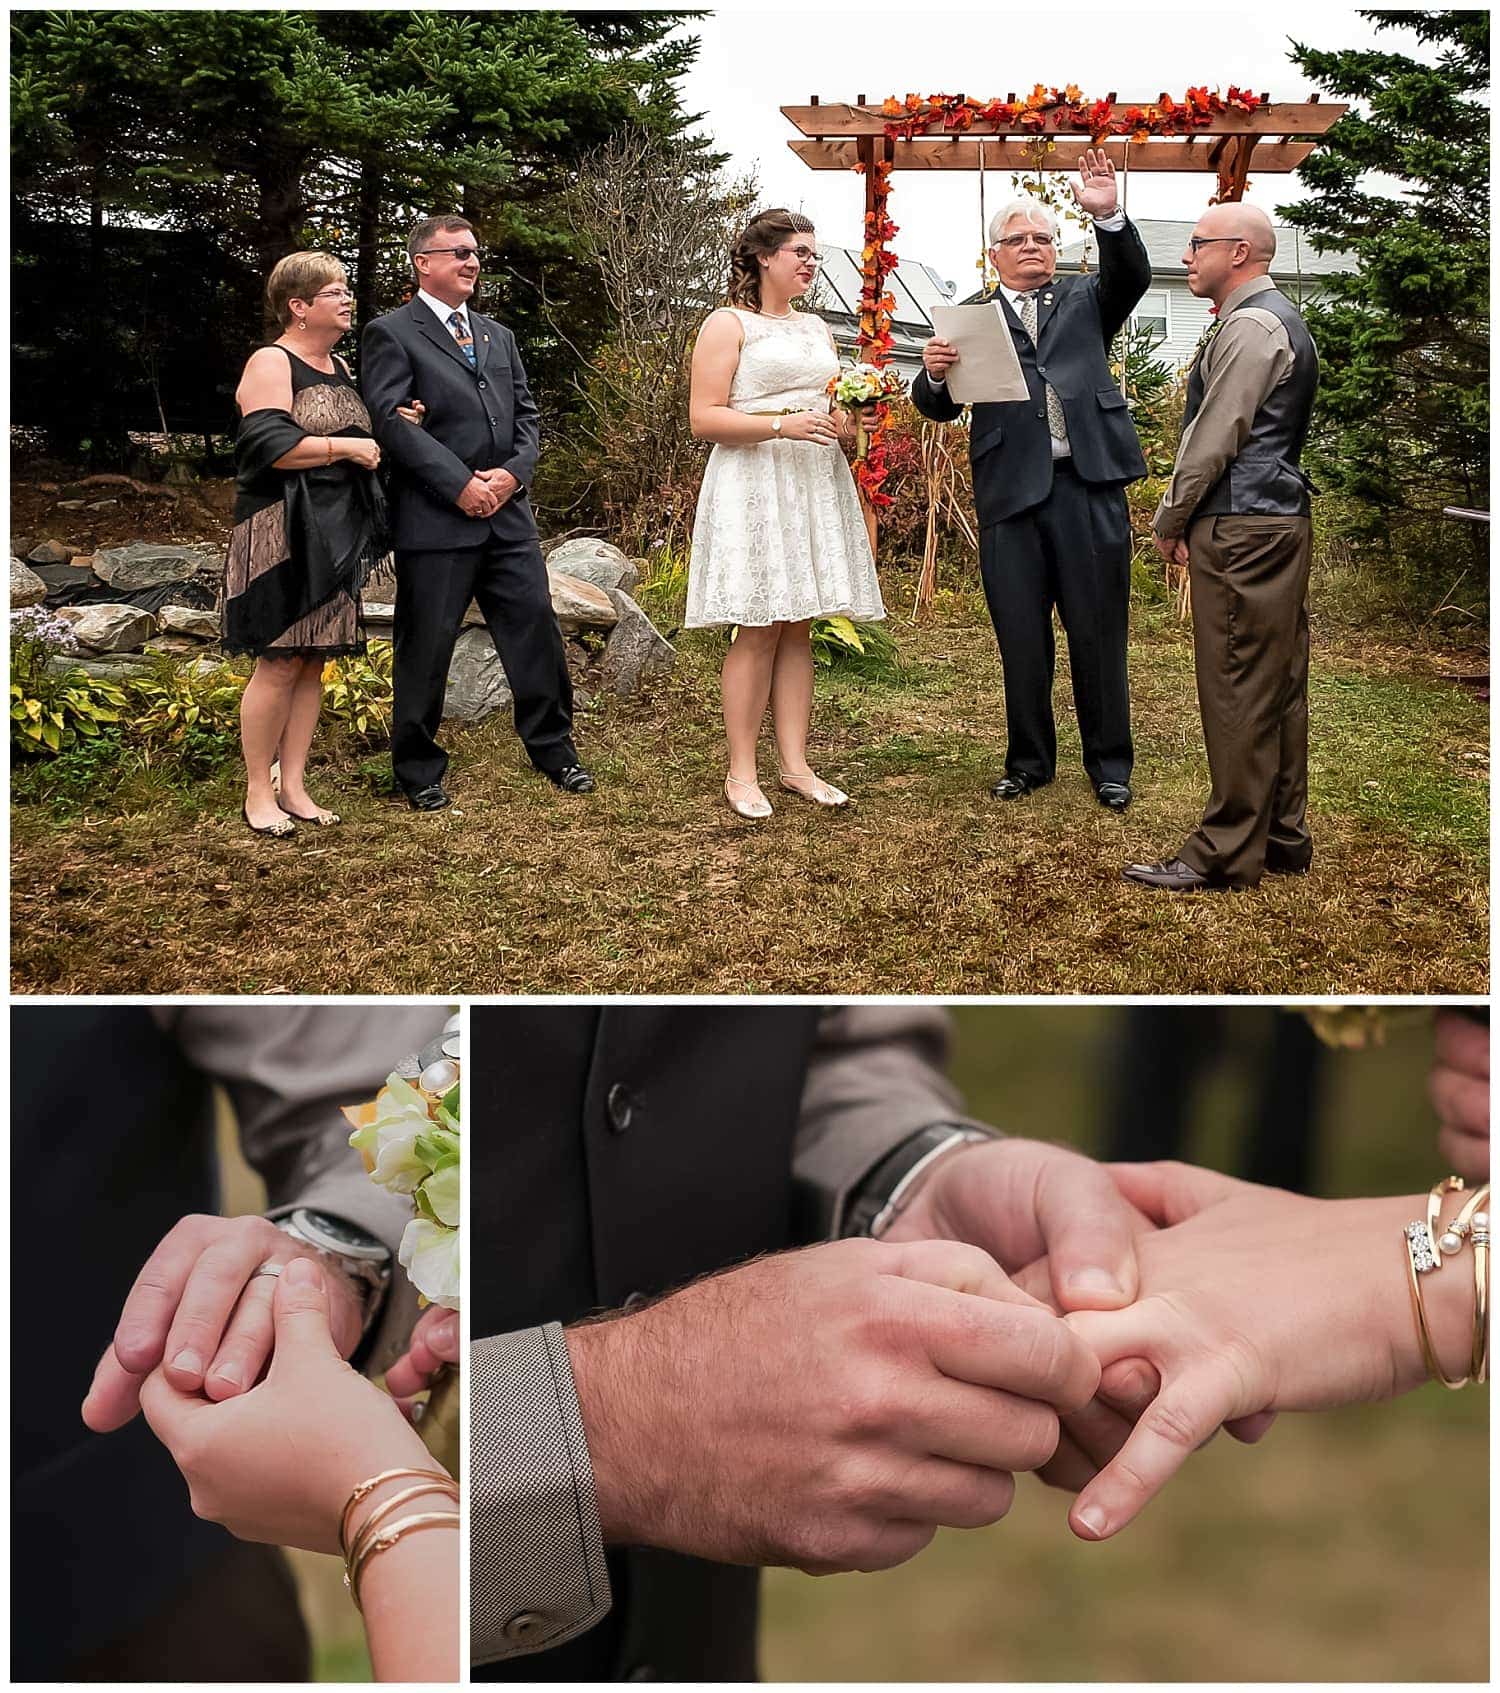 The bride and groom exchange vows and wedding rings during their backyard wedding ceremony in Dartmouth, NS.